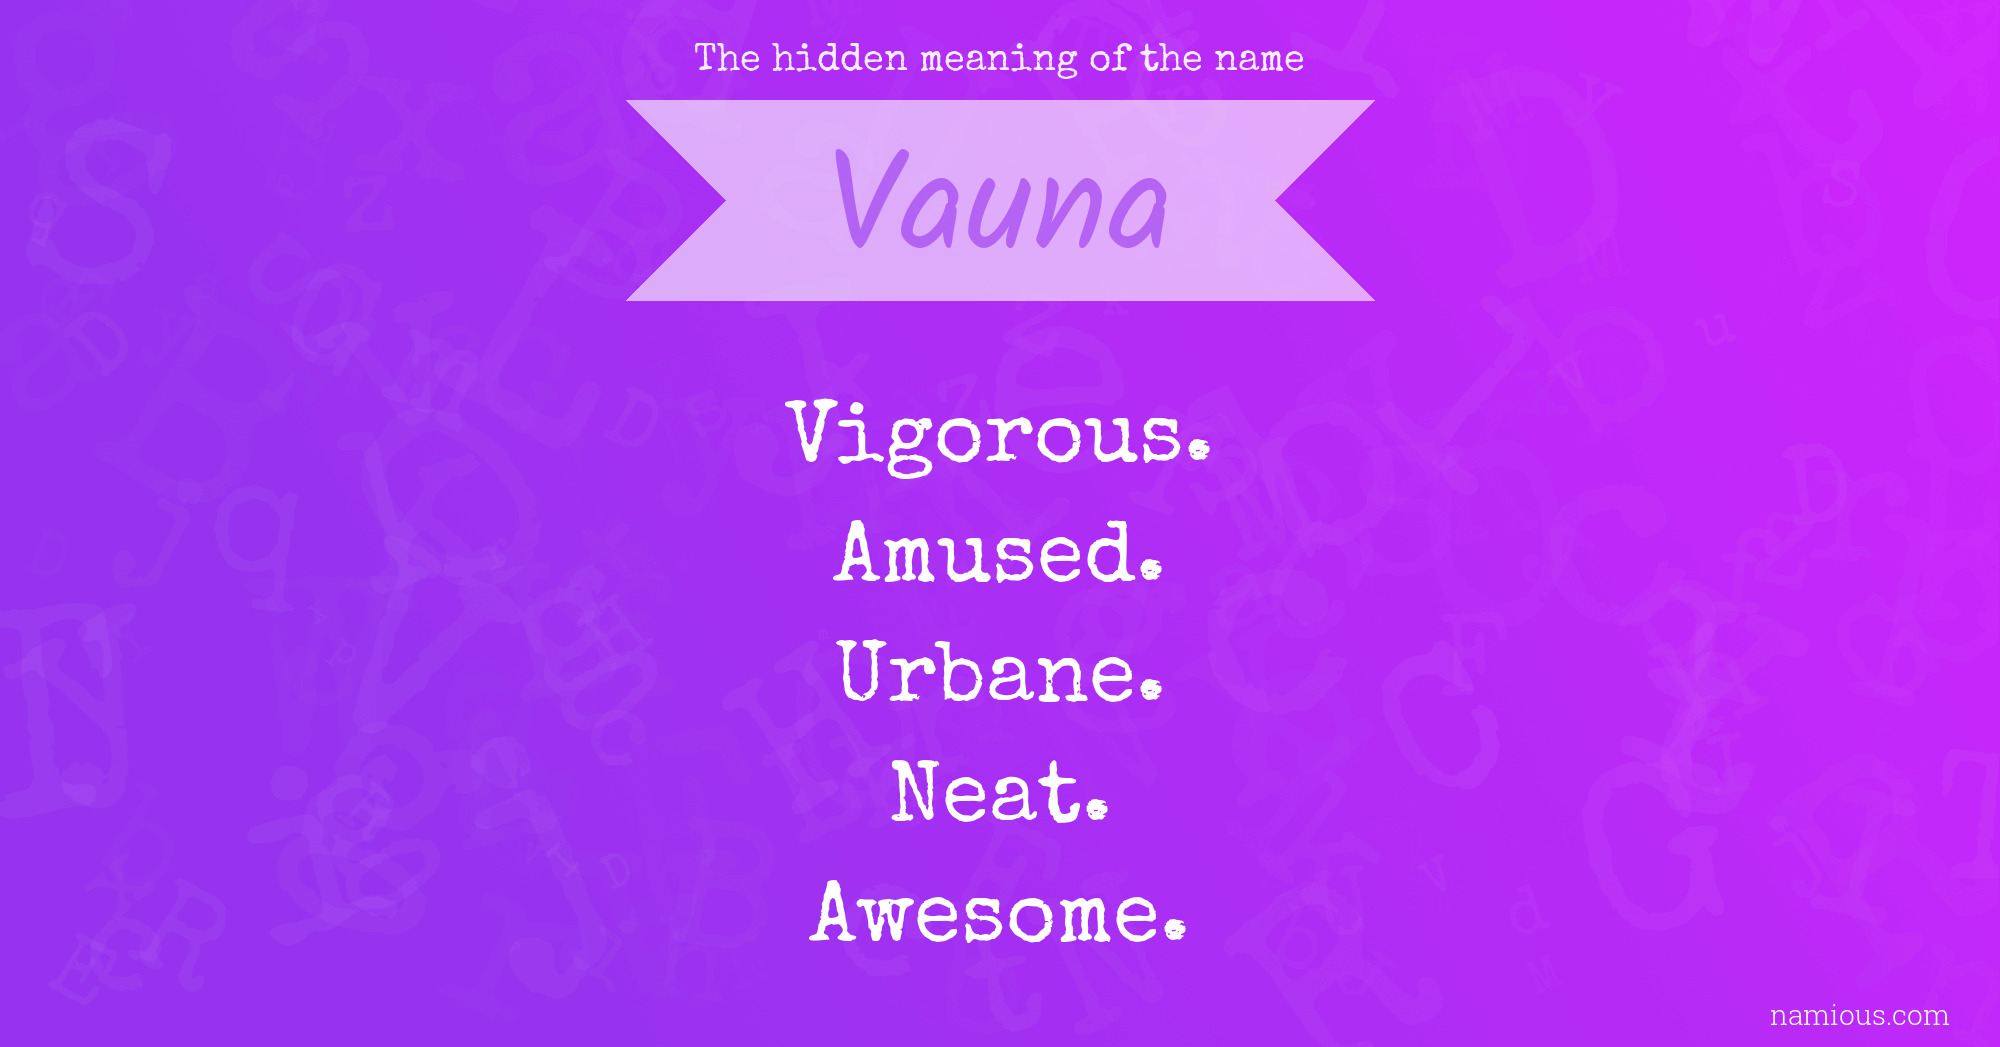 The hidden meaning of the name Vauna